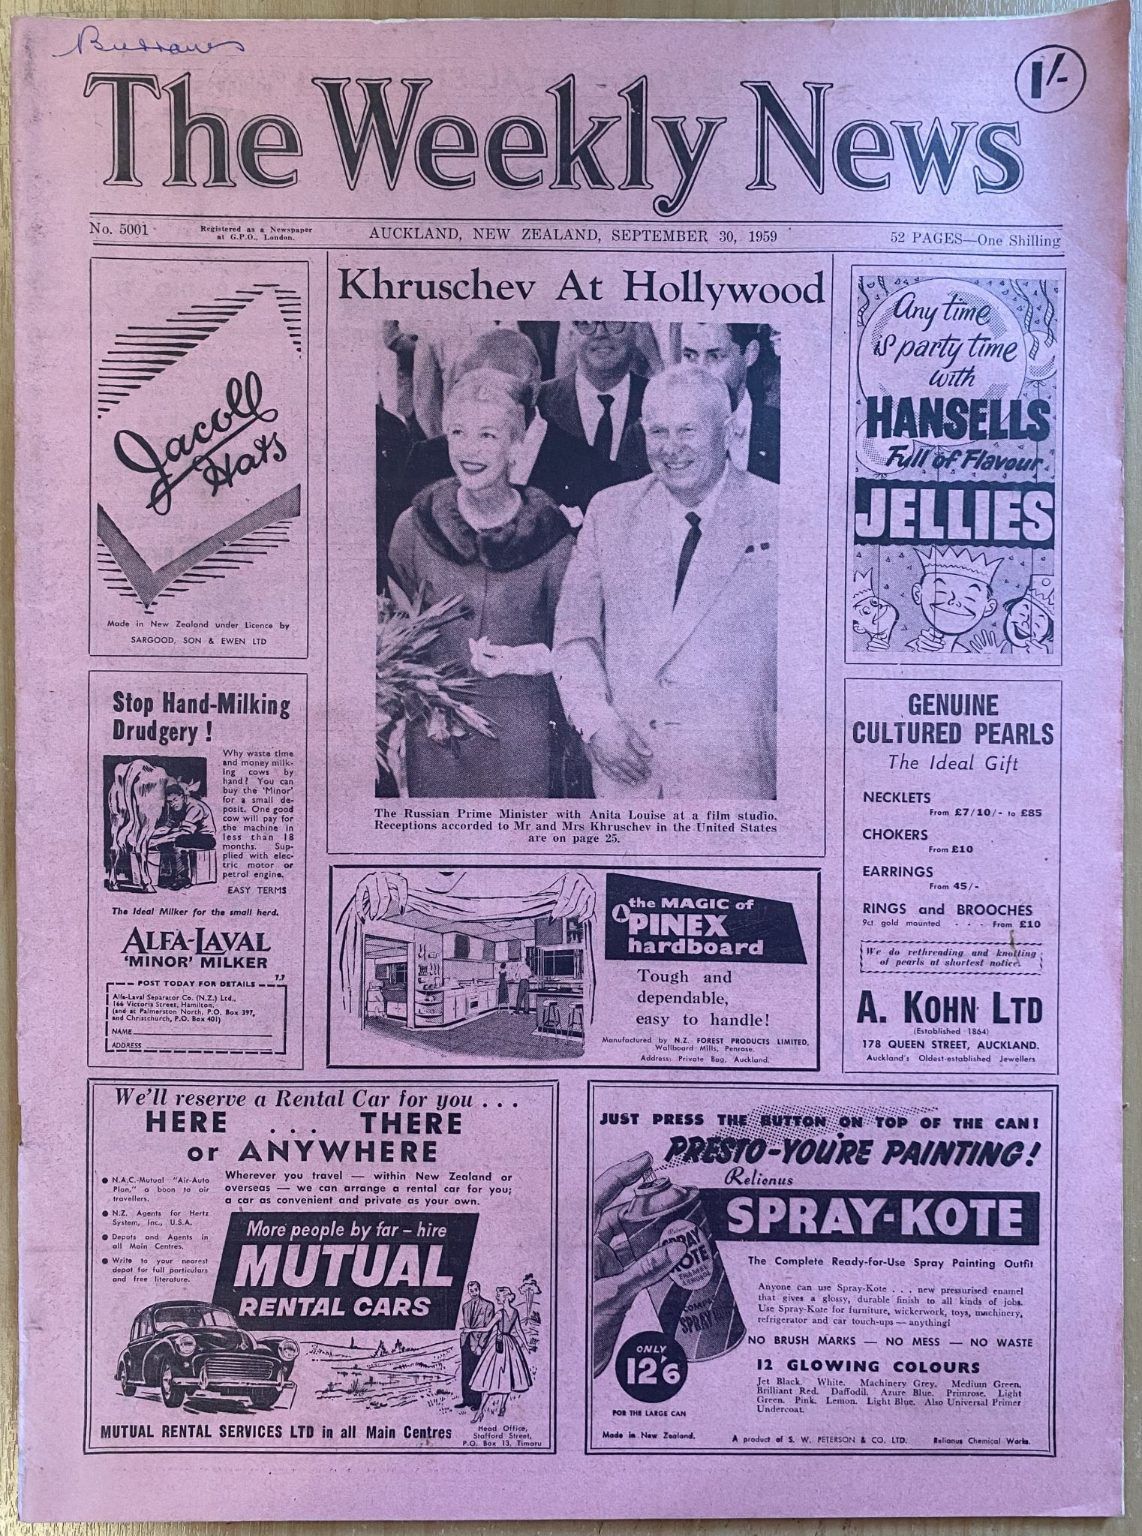 OLD NEWSPAPER: The Weekly News - No. 5001, 30 September 1959